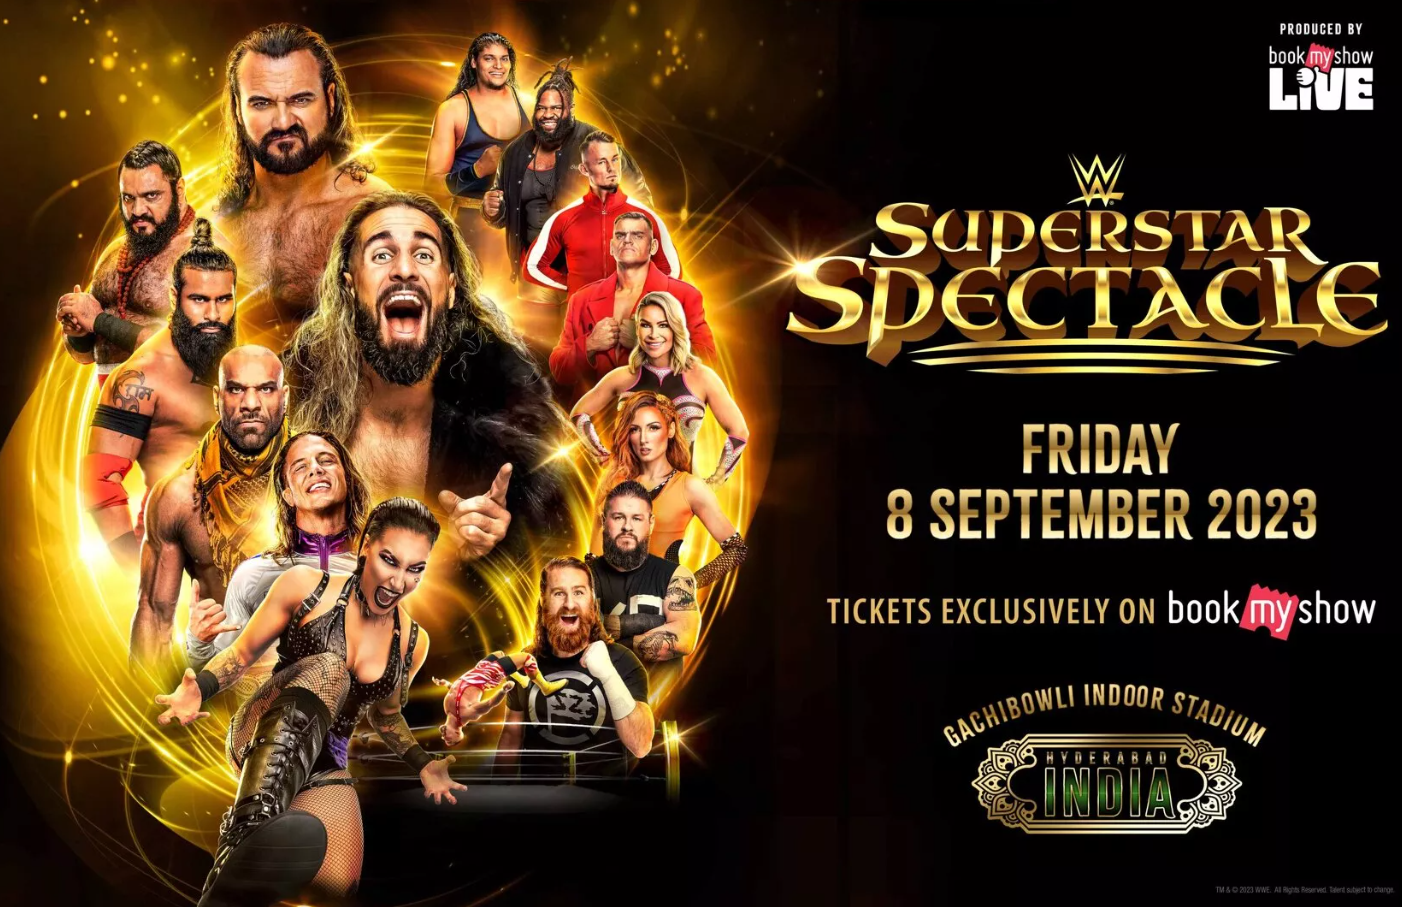 WWE Superstar Spectacle in India Where and how to watch?